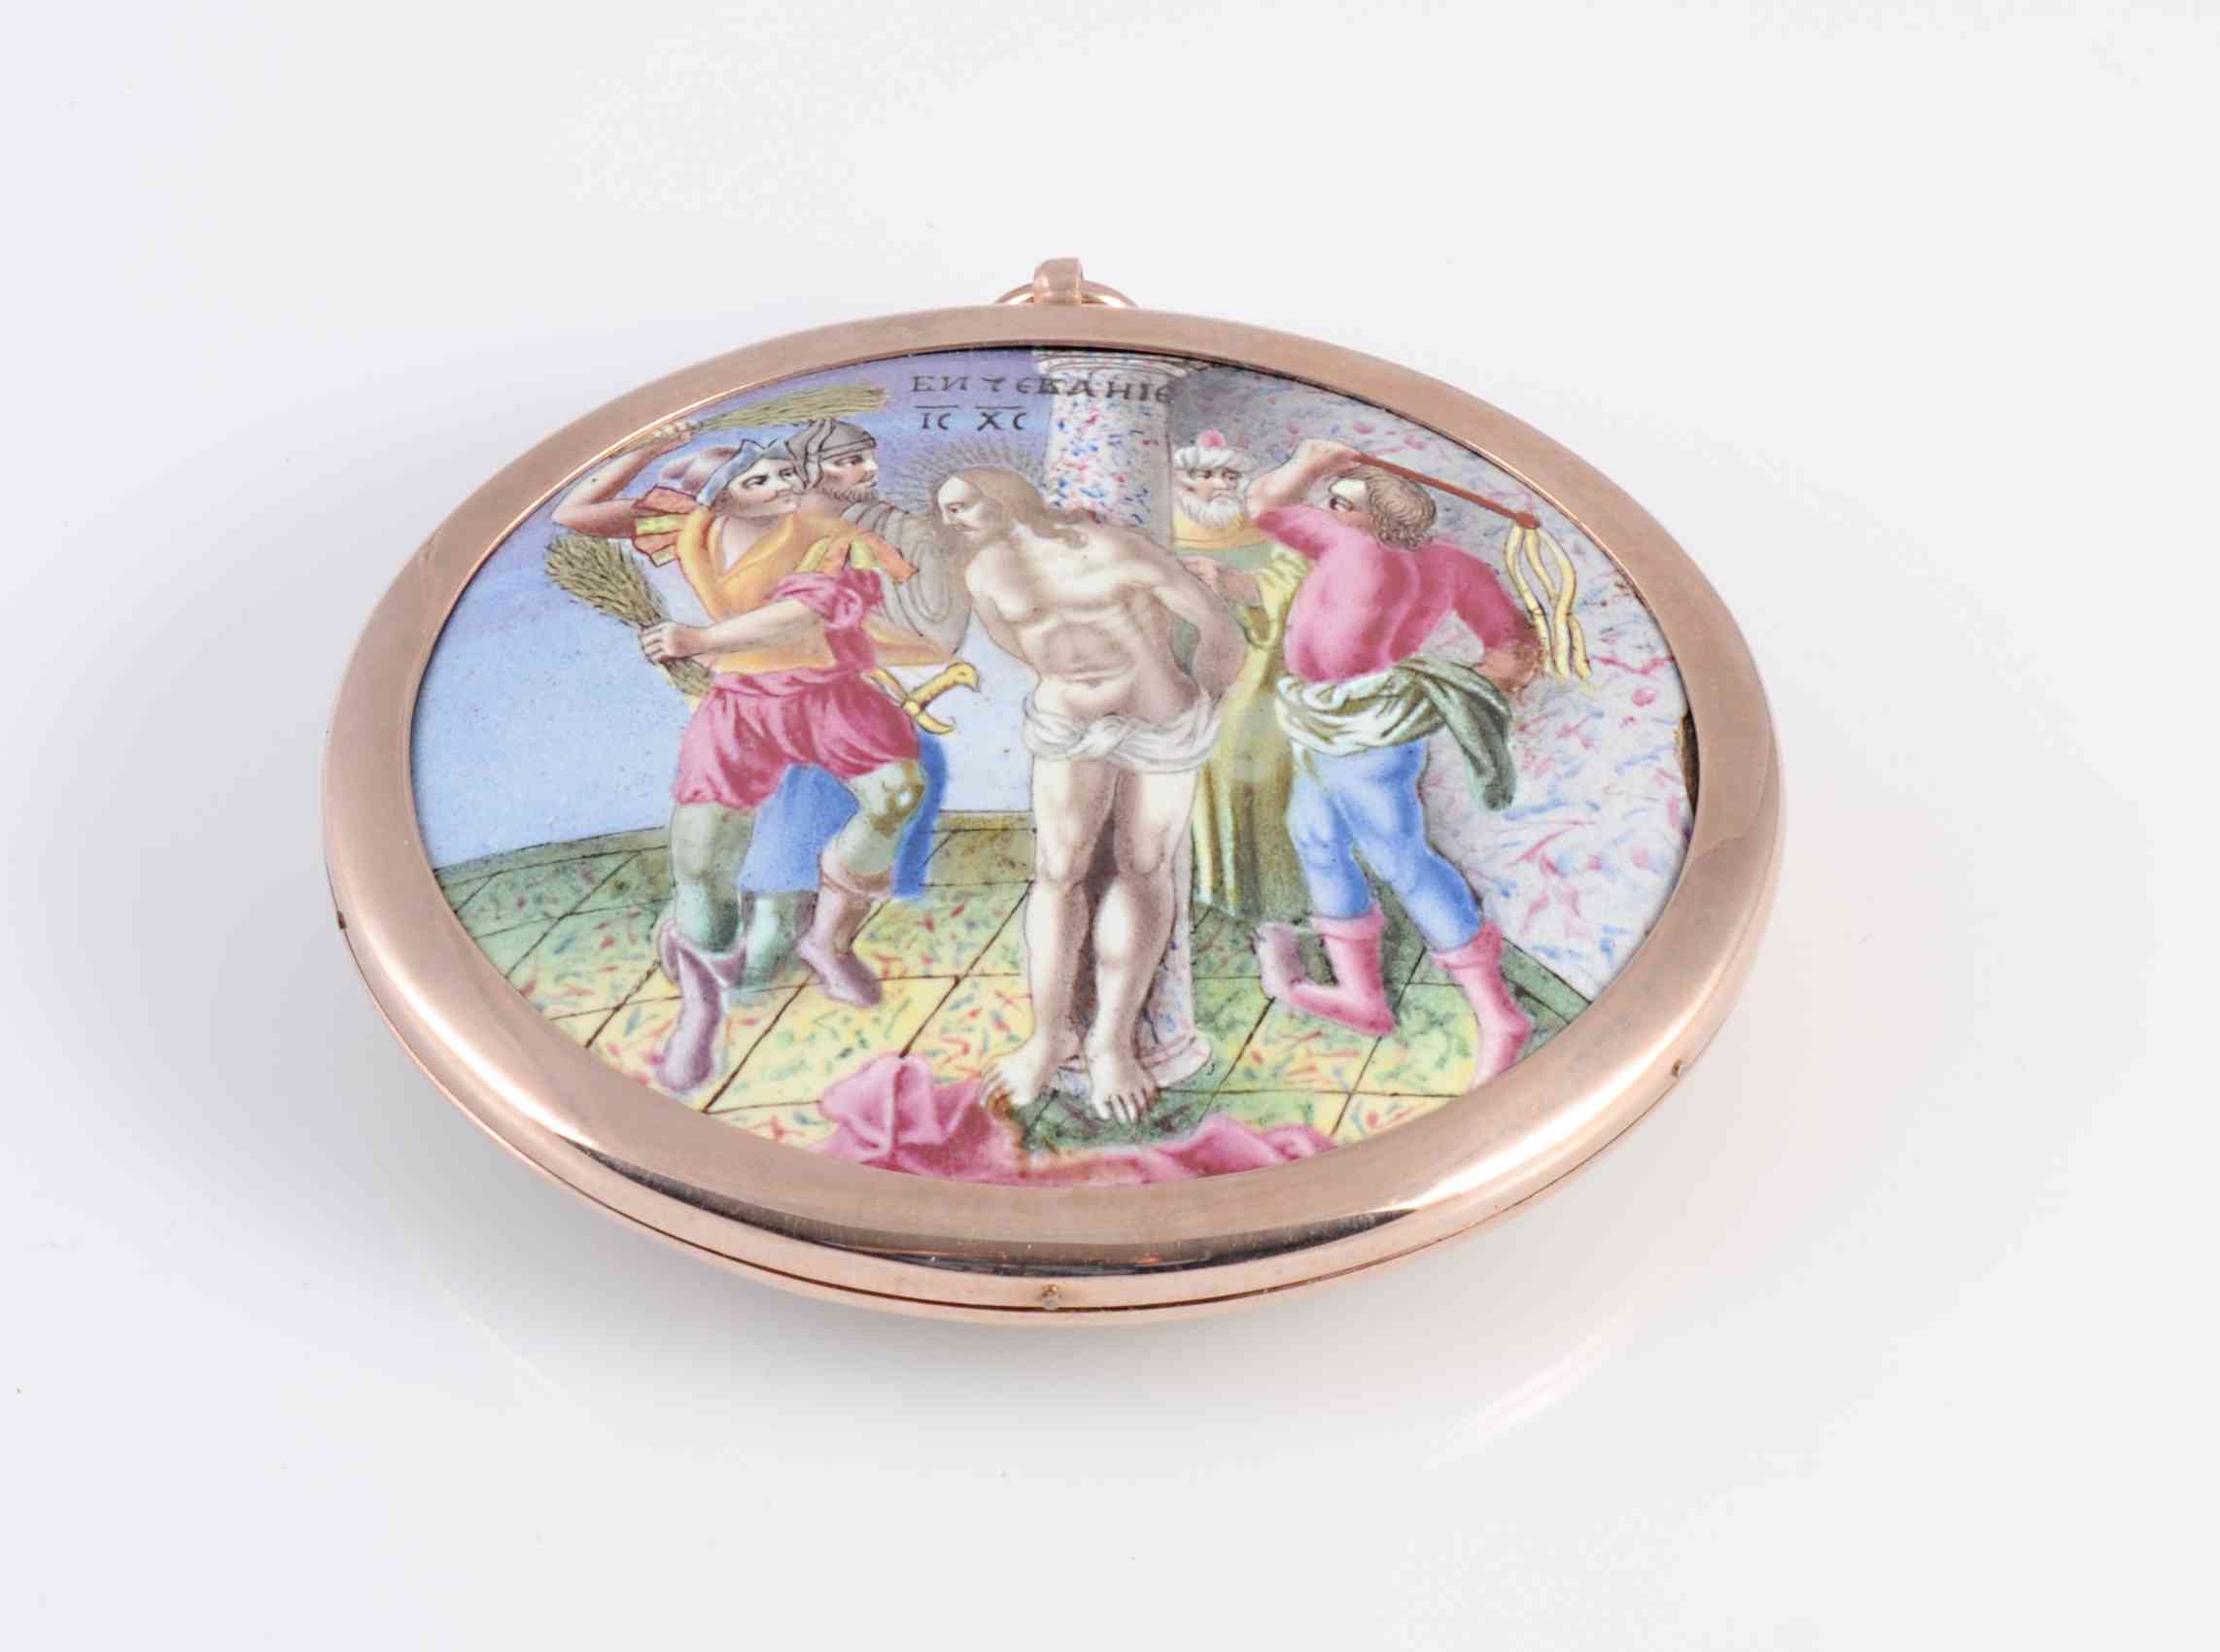 A DOUBLE SIDED ENAMEL MINIATURE PAINTED WITH SCENES FROM THE PASSION OF CHRIST,